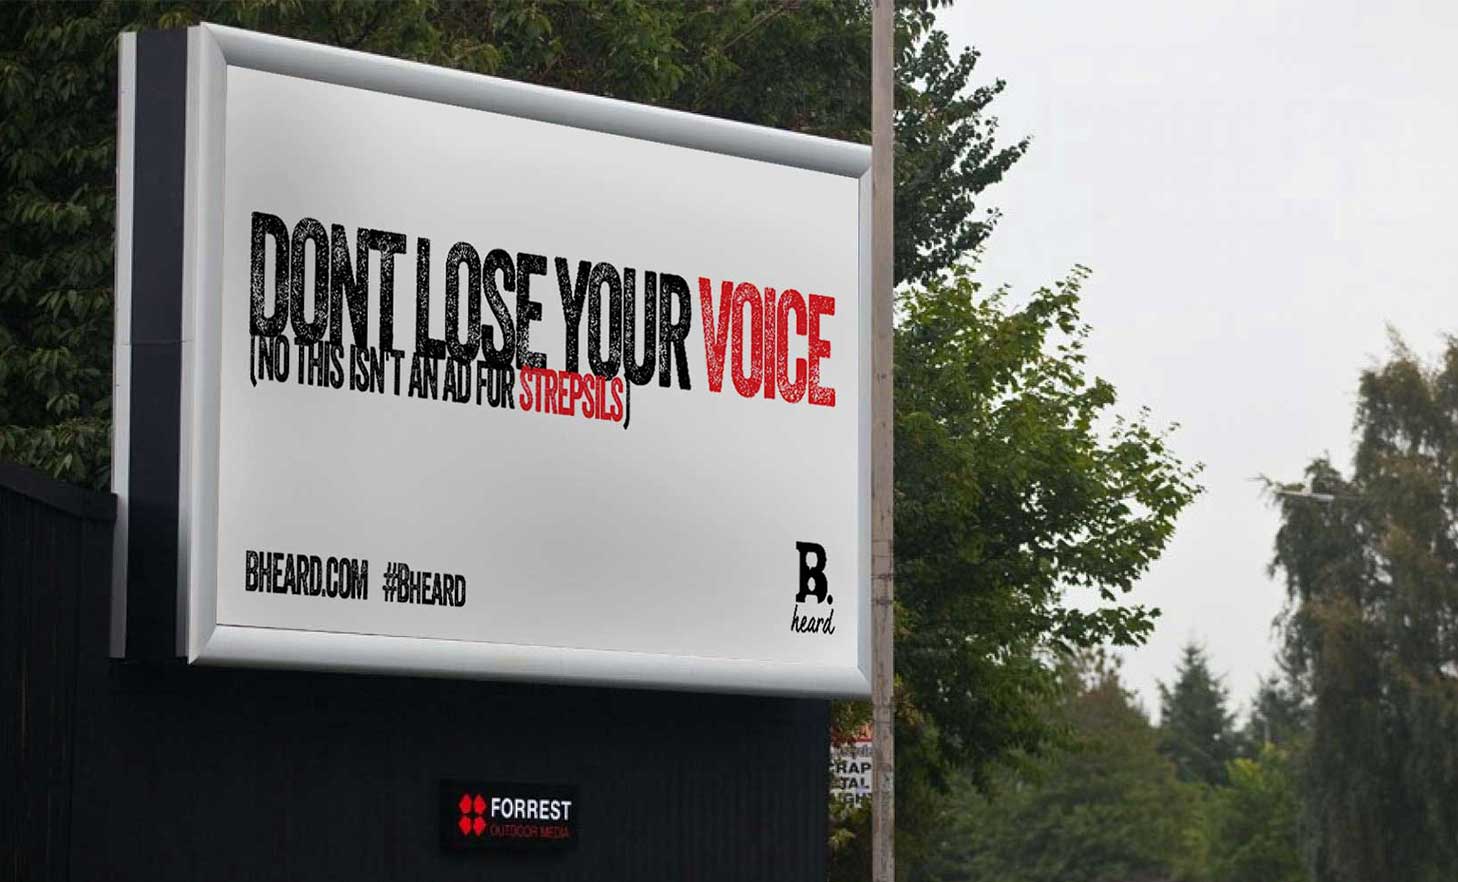 White billboard has black and red text saying 'Dont lose your voice (no this isn't an ad for strepsils)